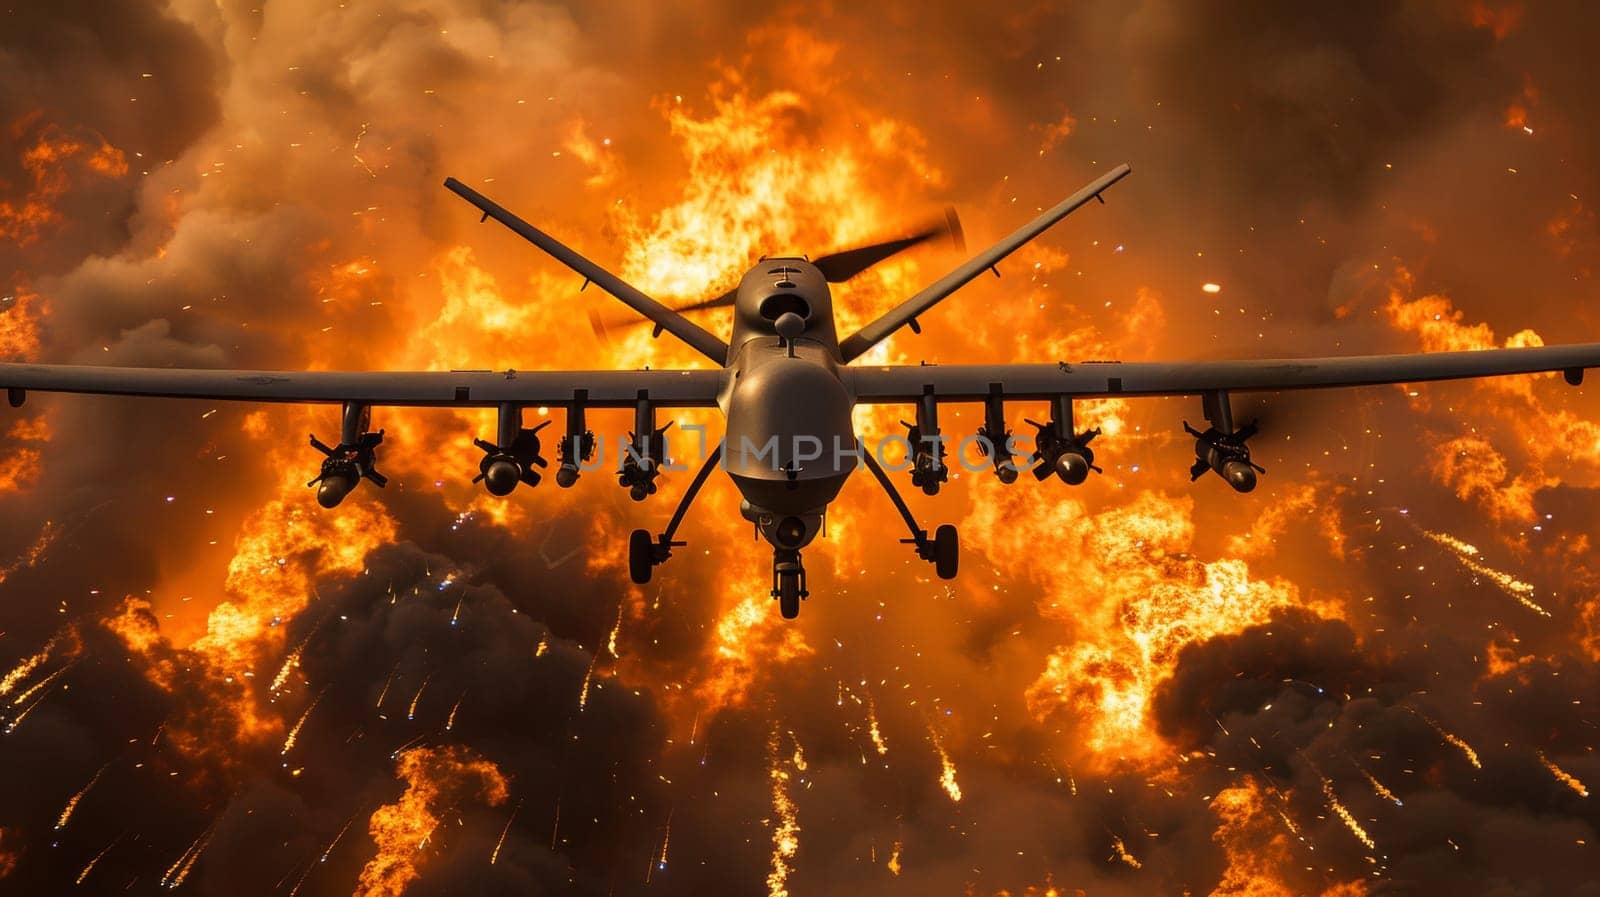 A large airplane flying through a fiery sky with many explosions